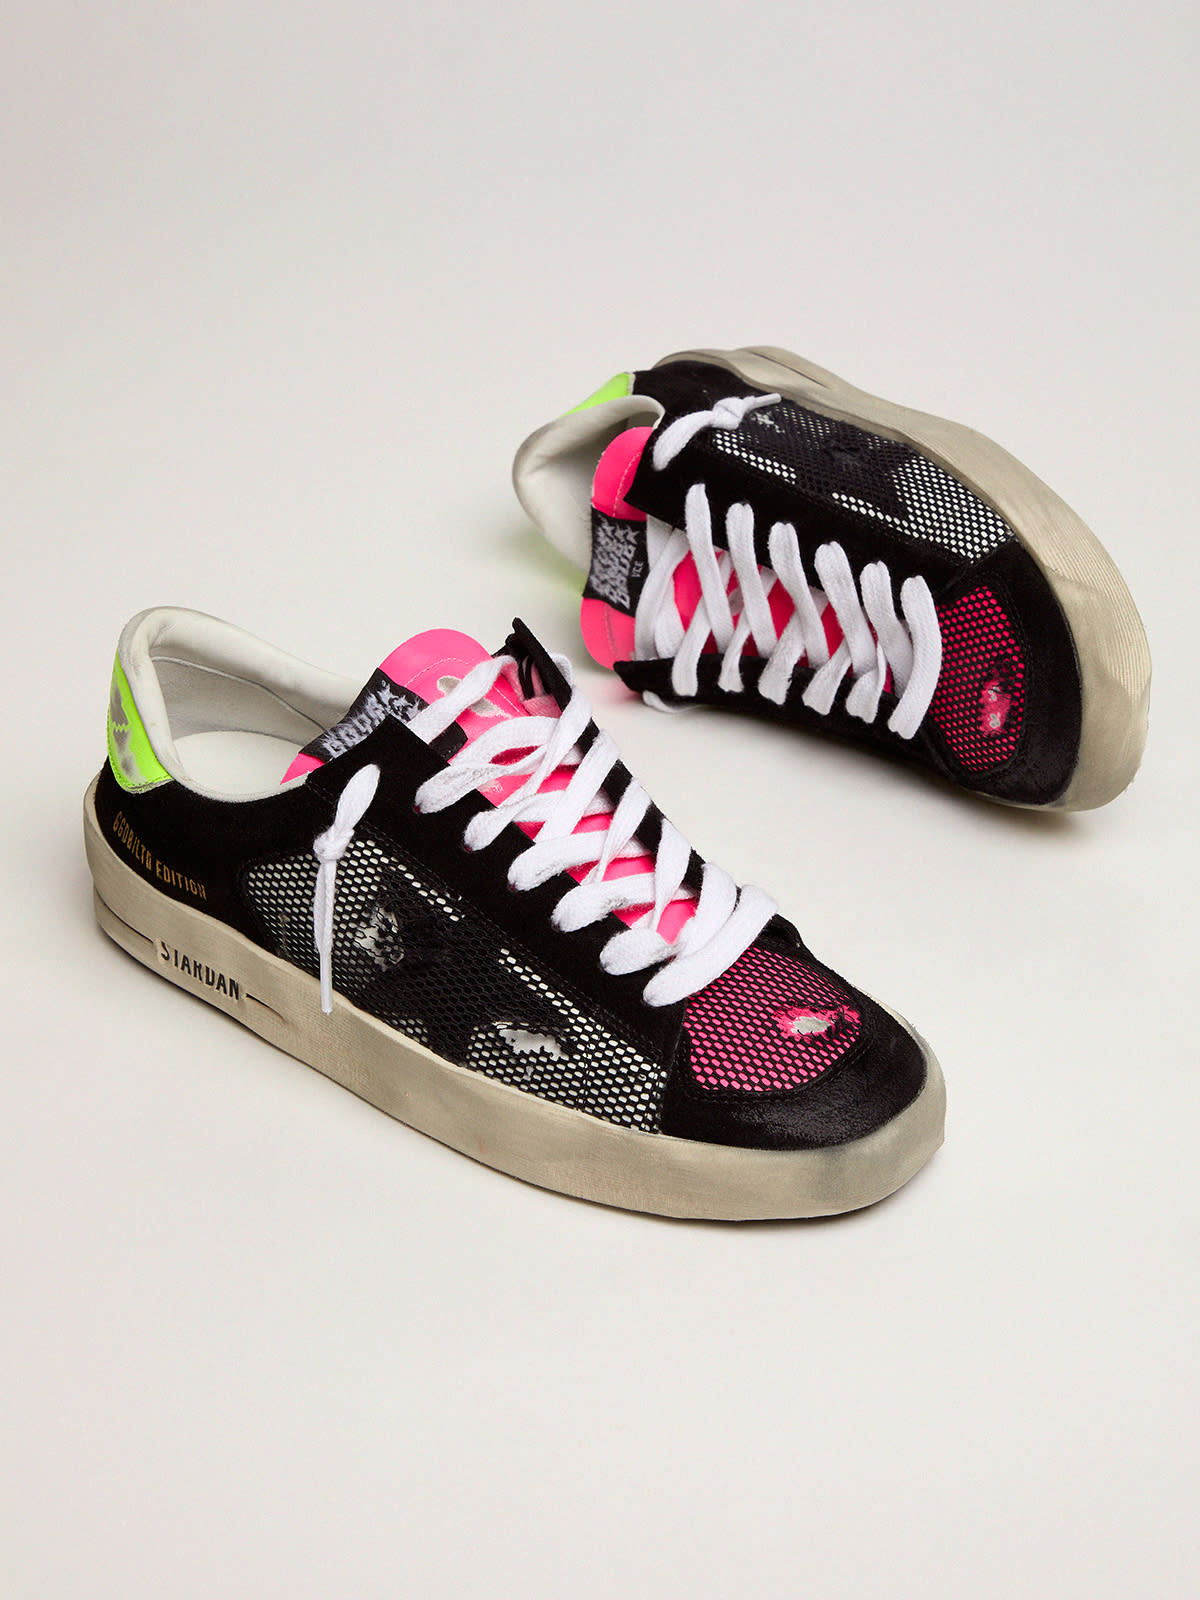 Golden Goose - Women’s Limited Edition Stardan sneakers in fuchsia and yellow in 